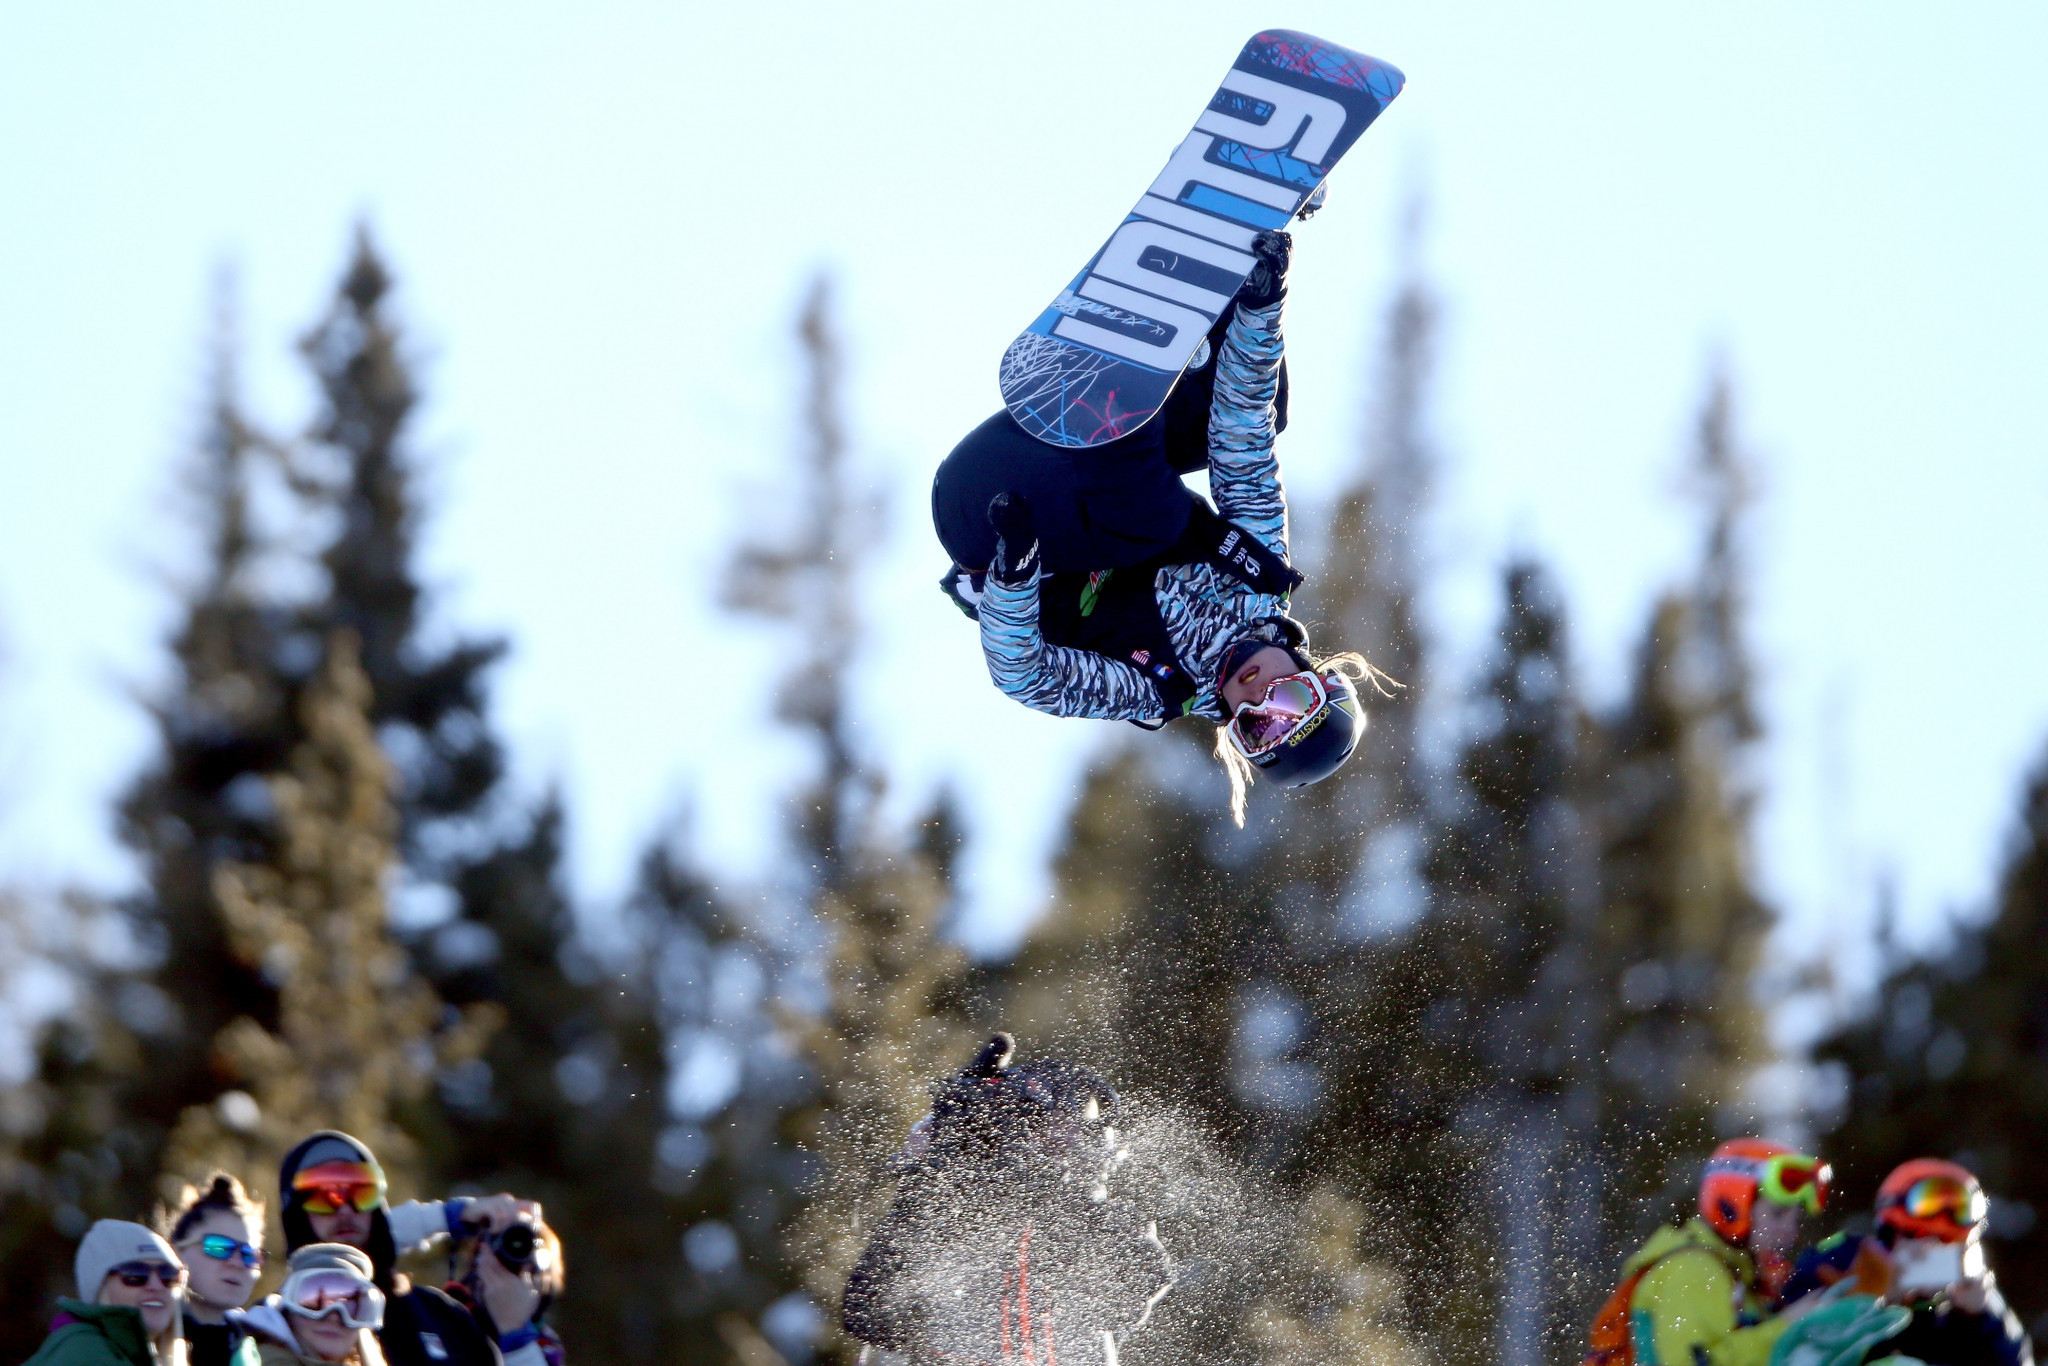 The United States dominated qualification in the halfpipe snowboard event ©Getty Images